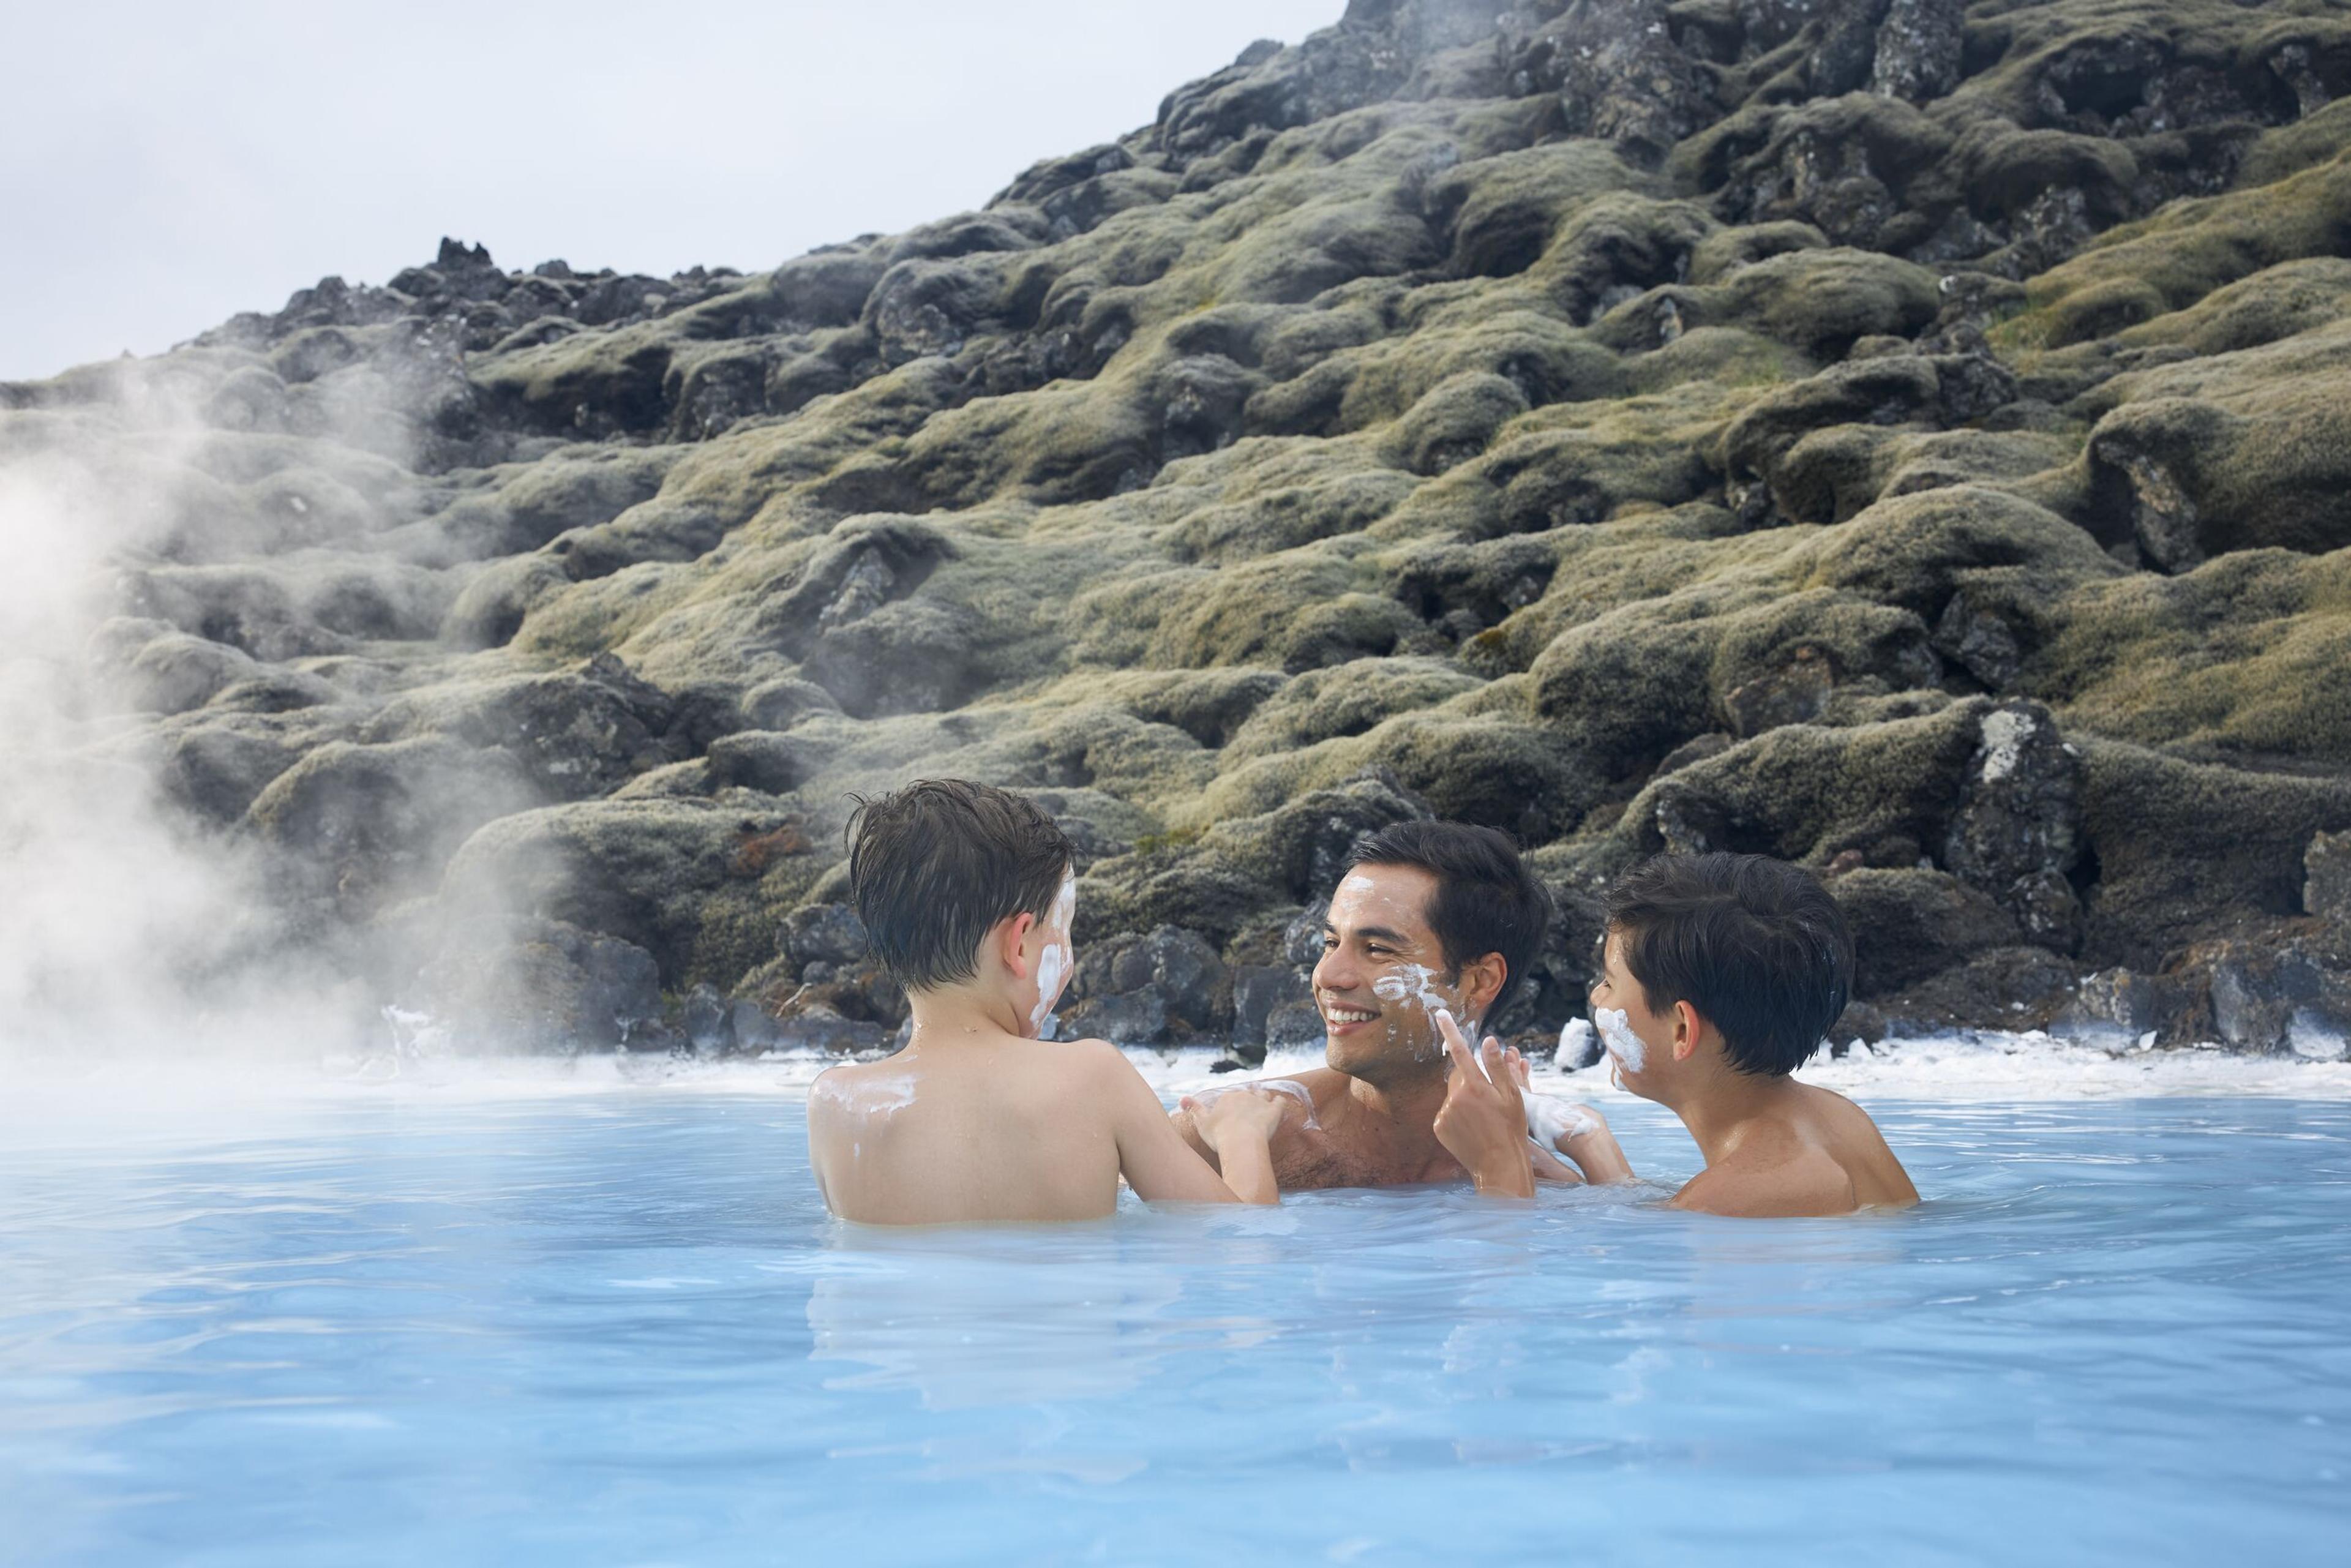 A man and two kids enjoying the milky-blue waters of the Blue Lagoon, playfully applying silica mud masks on each other's faces